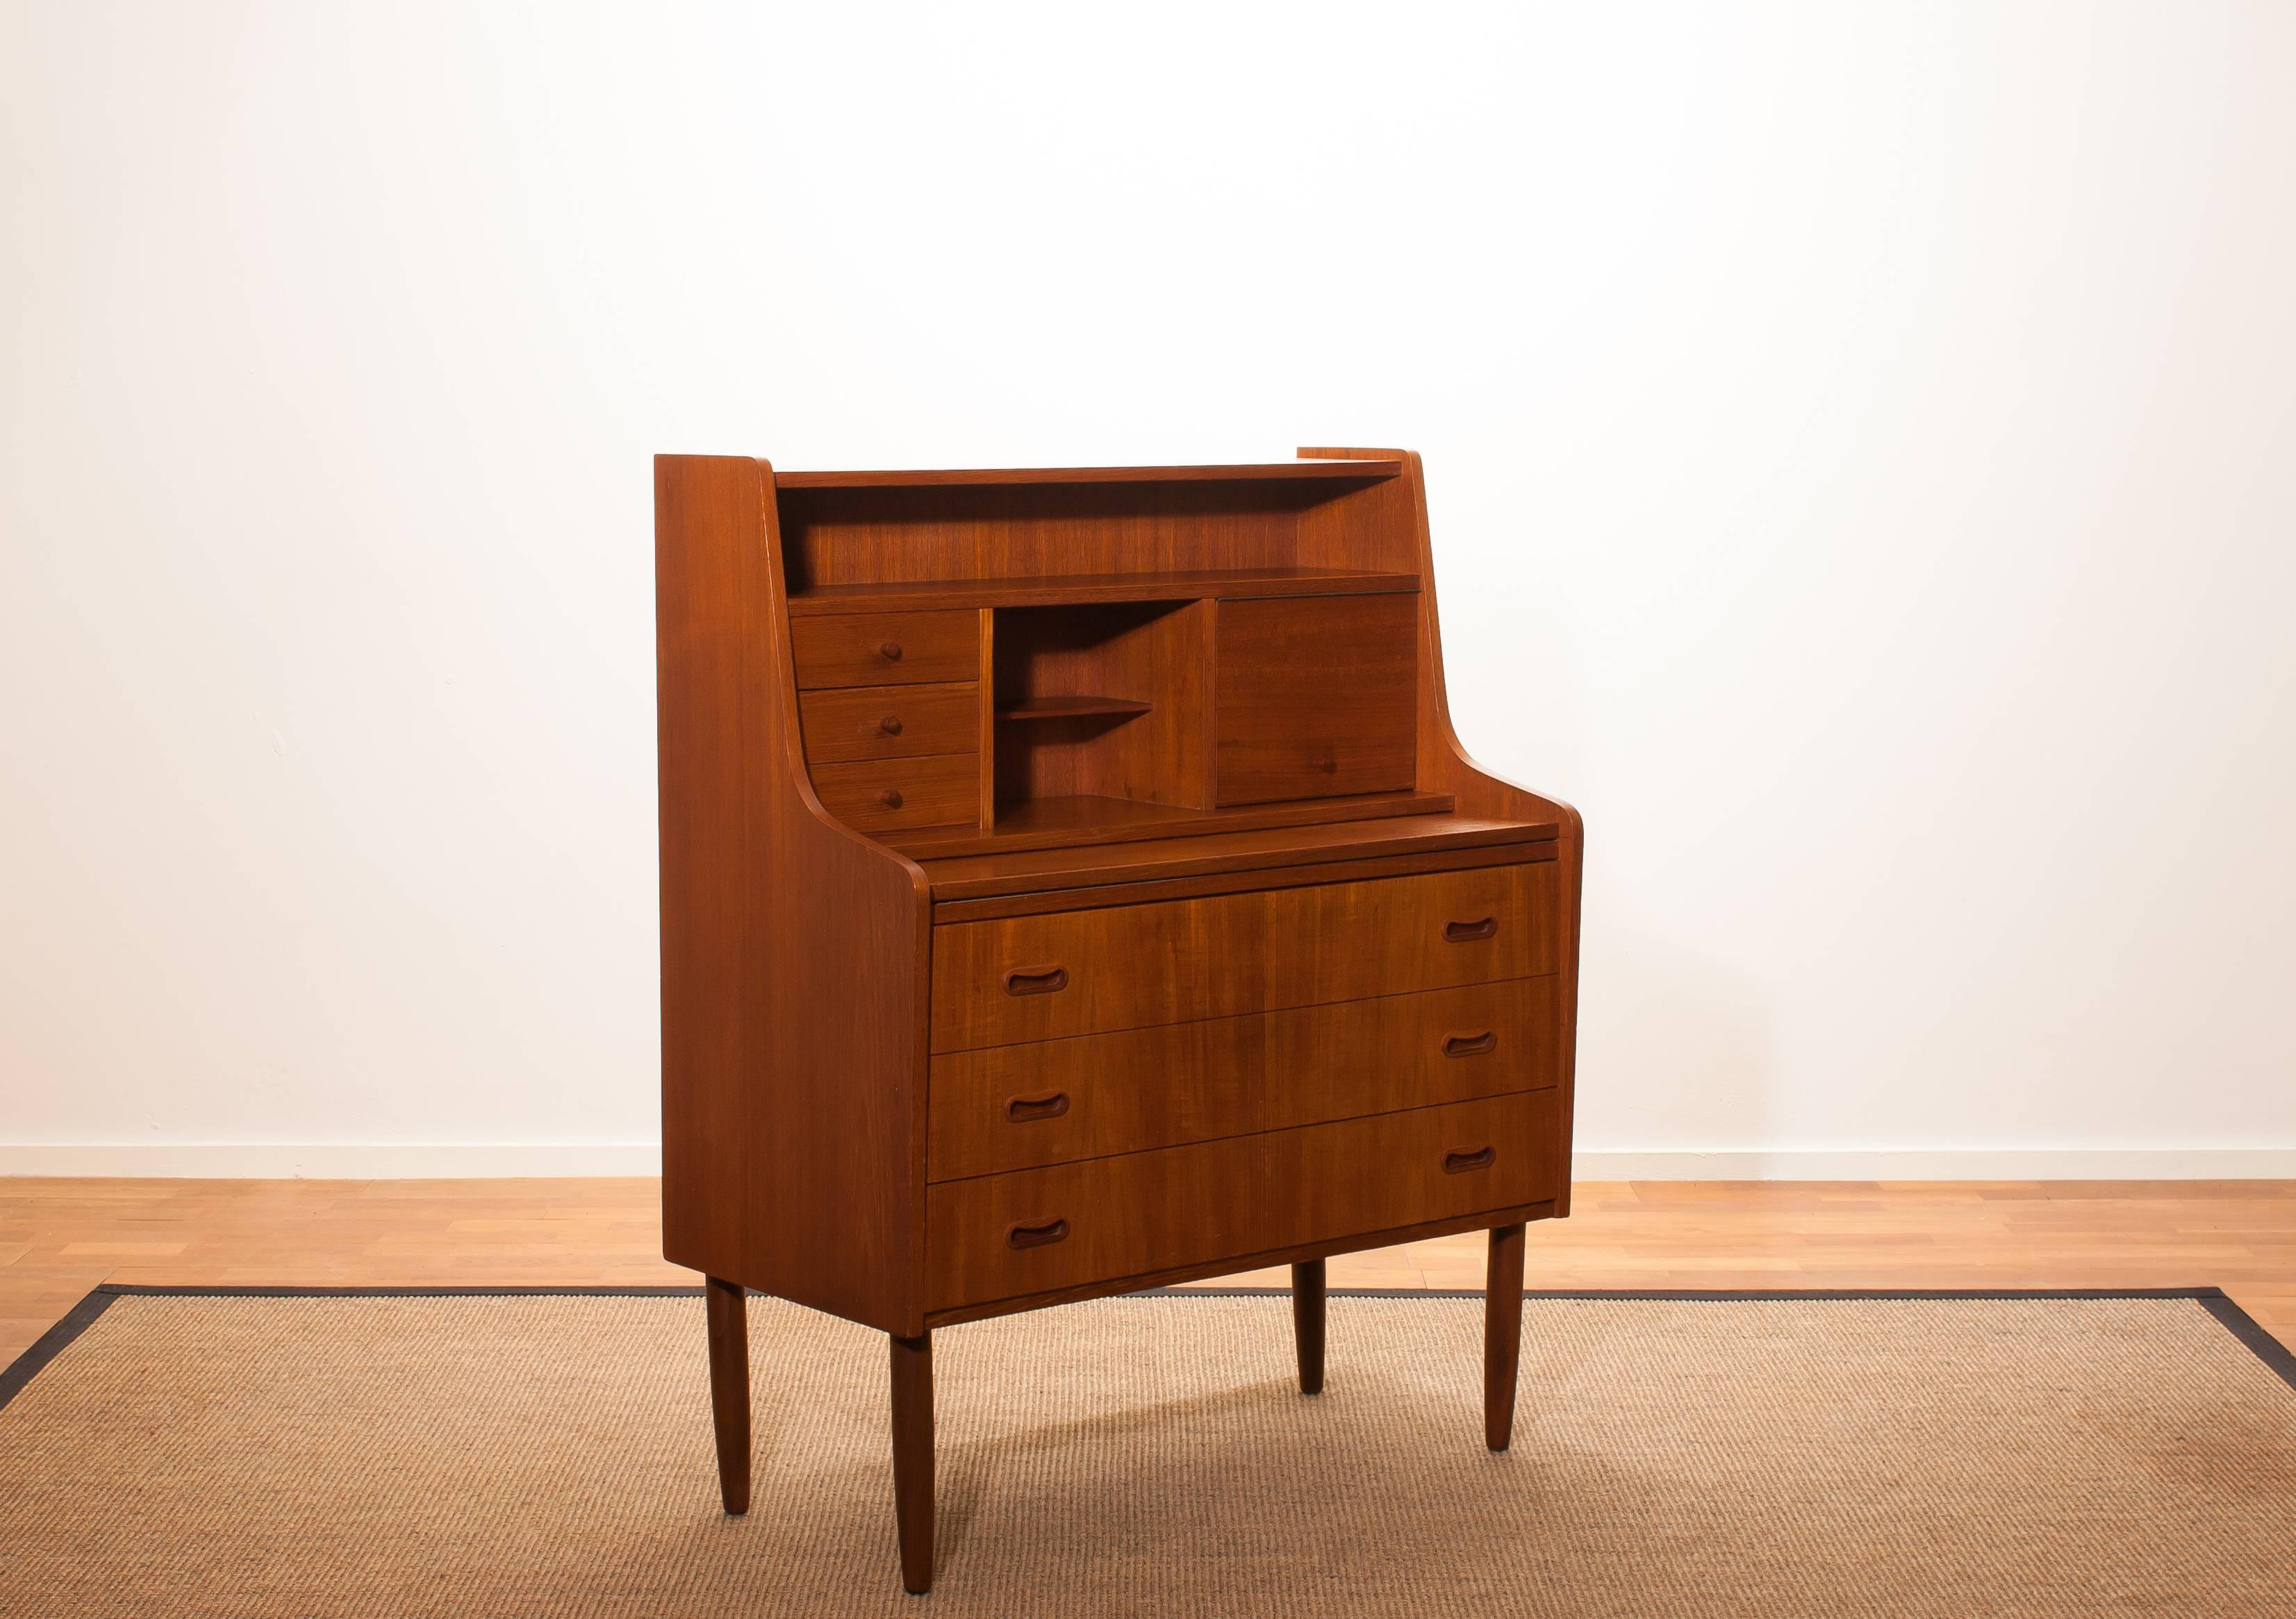 Beautiful secretaire or dressing table in the style of Peter Hvind.
The secretaire is made of teak and has a lot of storage space, an extendable writing space and a mirror.
It is in a wonderful condition.
Period 1950s 
Dimensions: H 110 cm